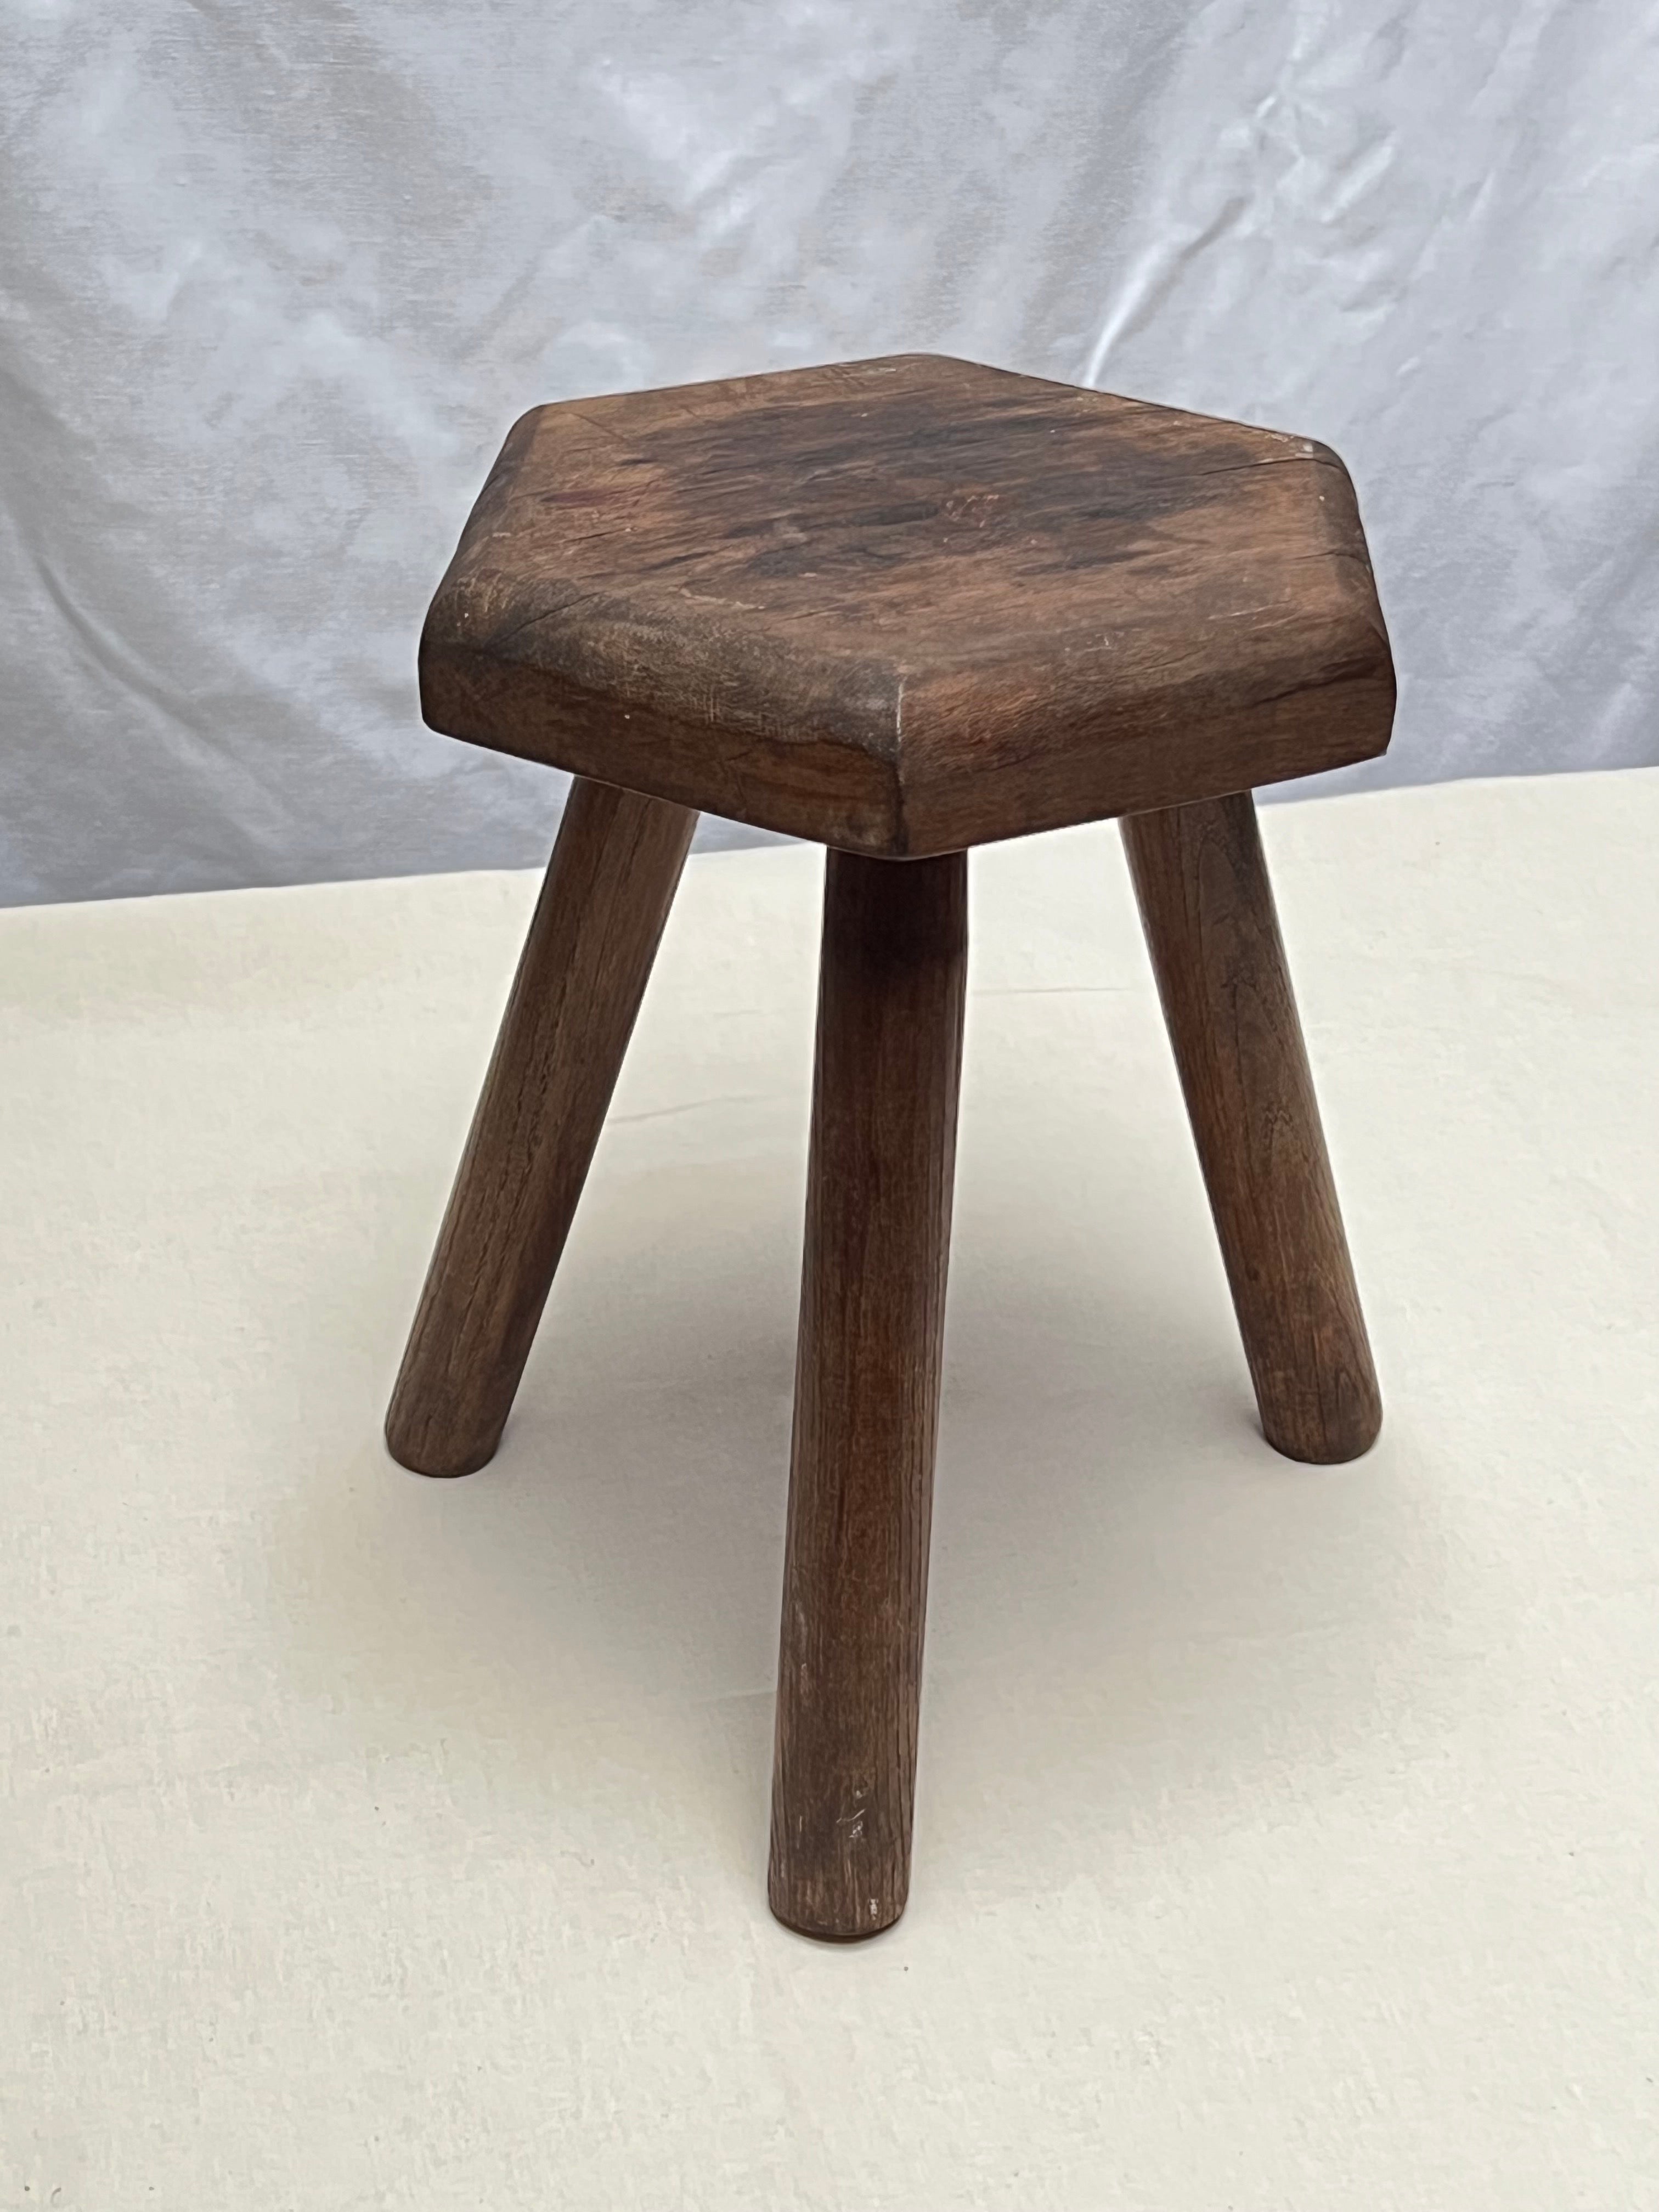 Very decorative massive pinewood stained stool. This tripod stool show nice details. Made in France in the 30's/40's/50's. Nice little addition to your interior. 


________________________________________________________
L'architecture brutaliste